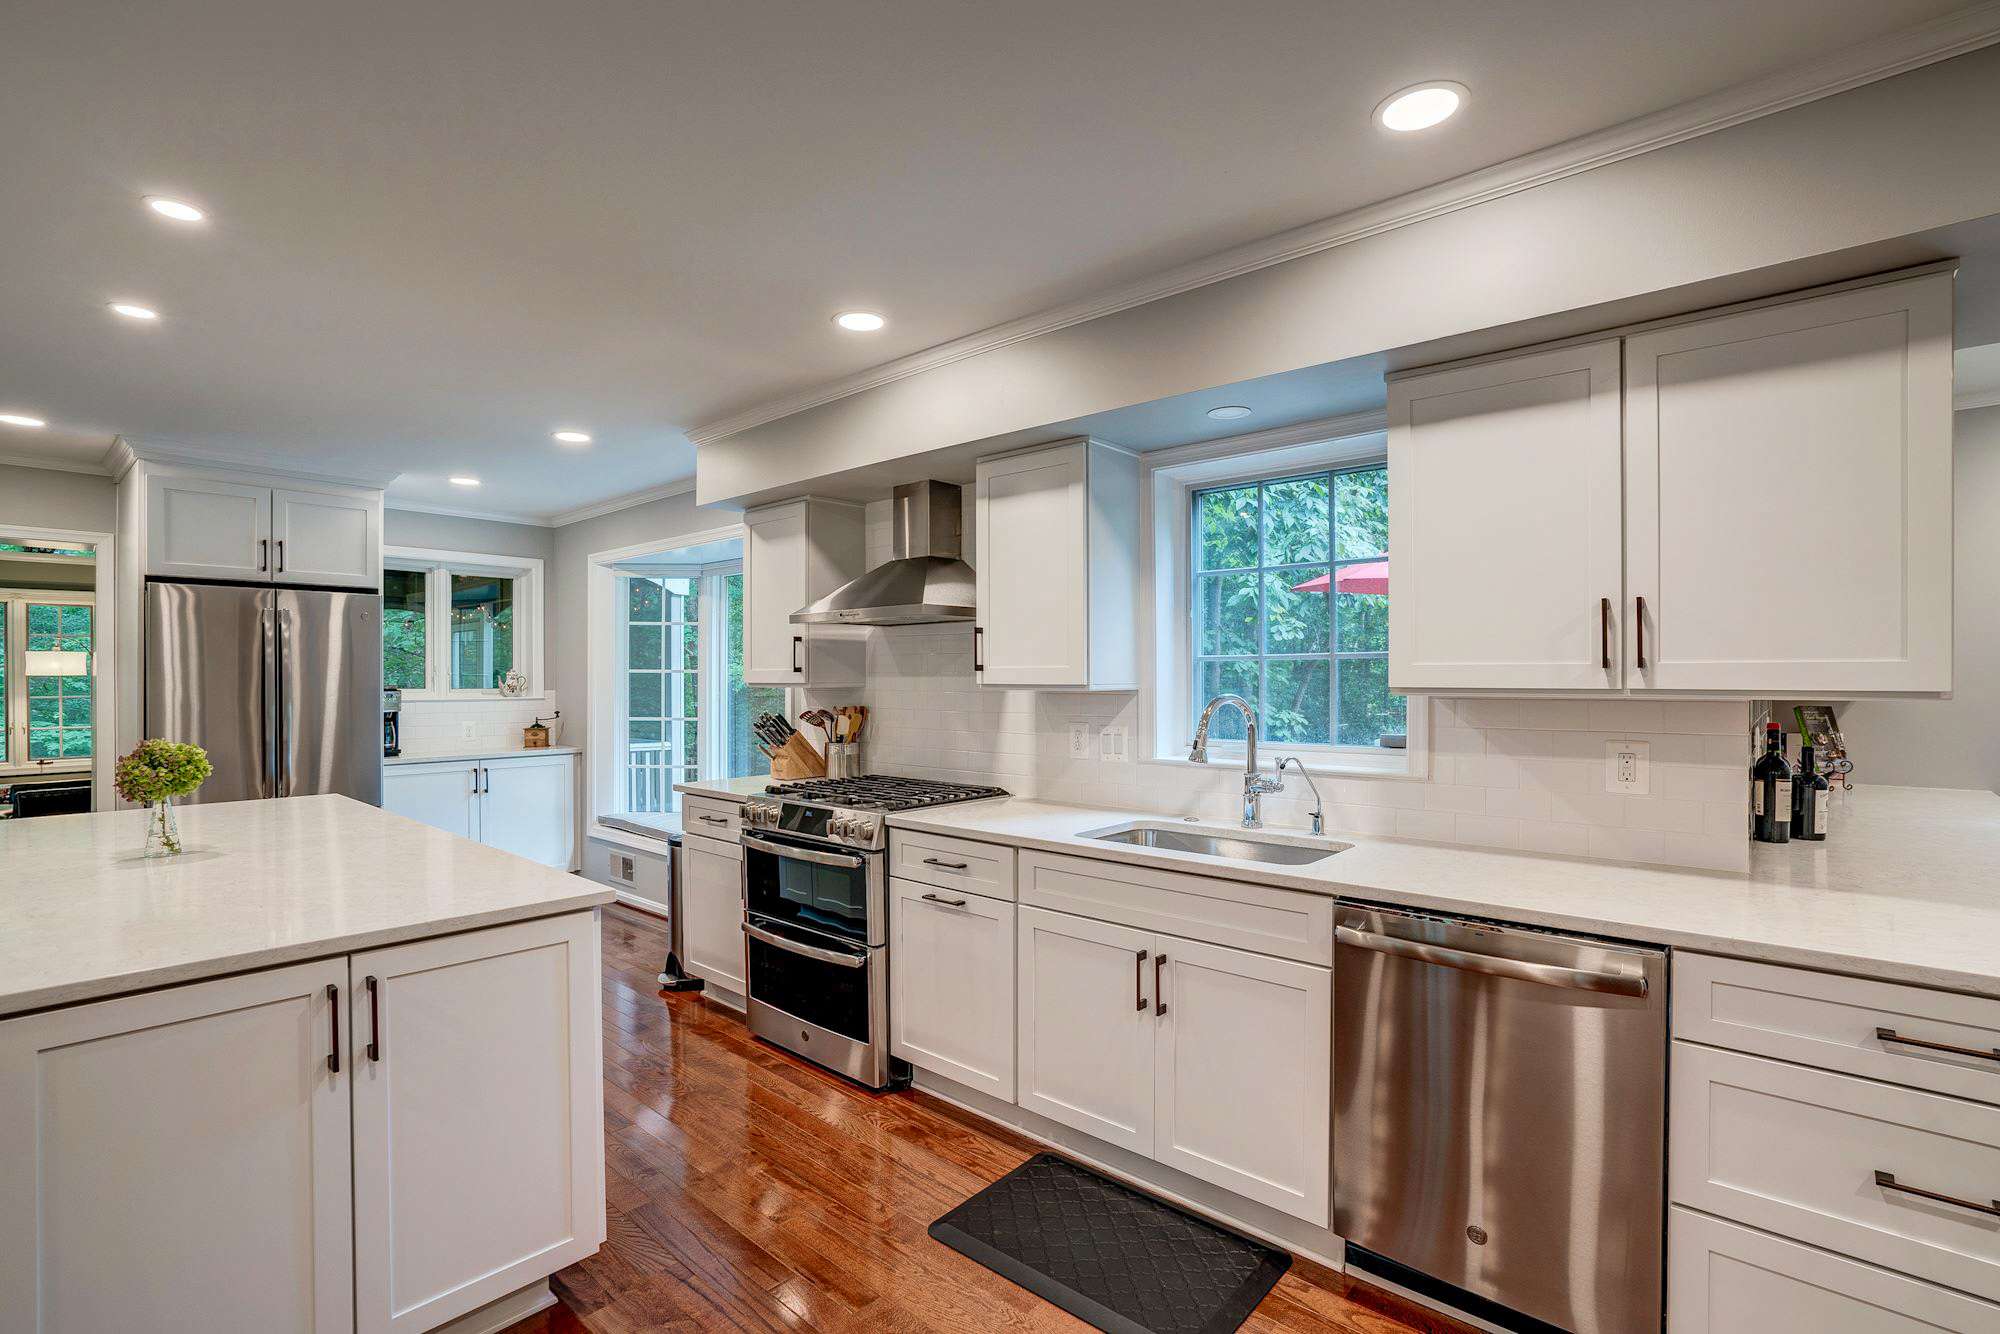 White kitchen cabinets and counters